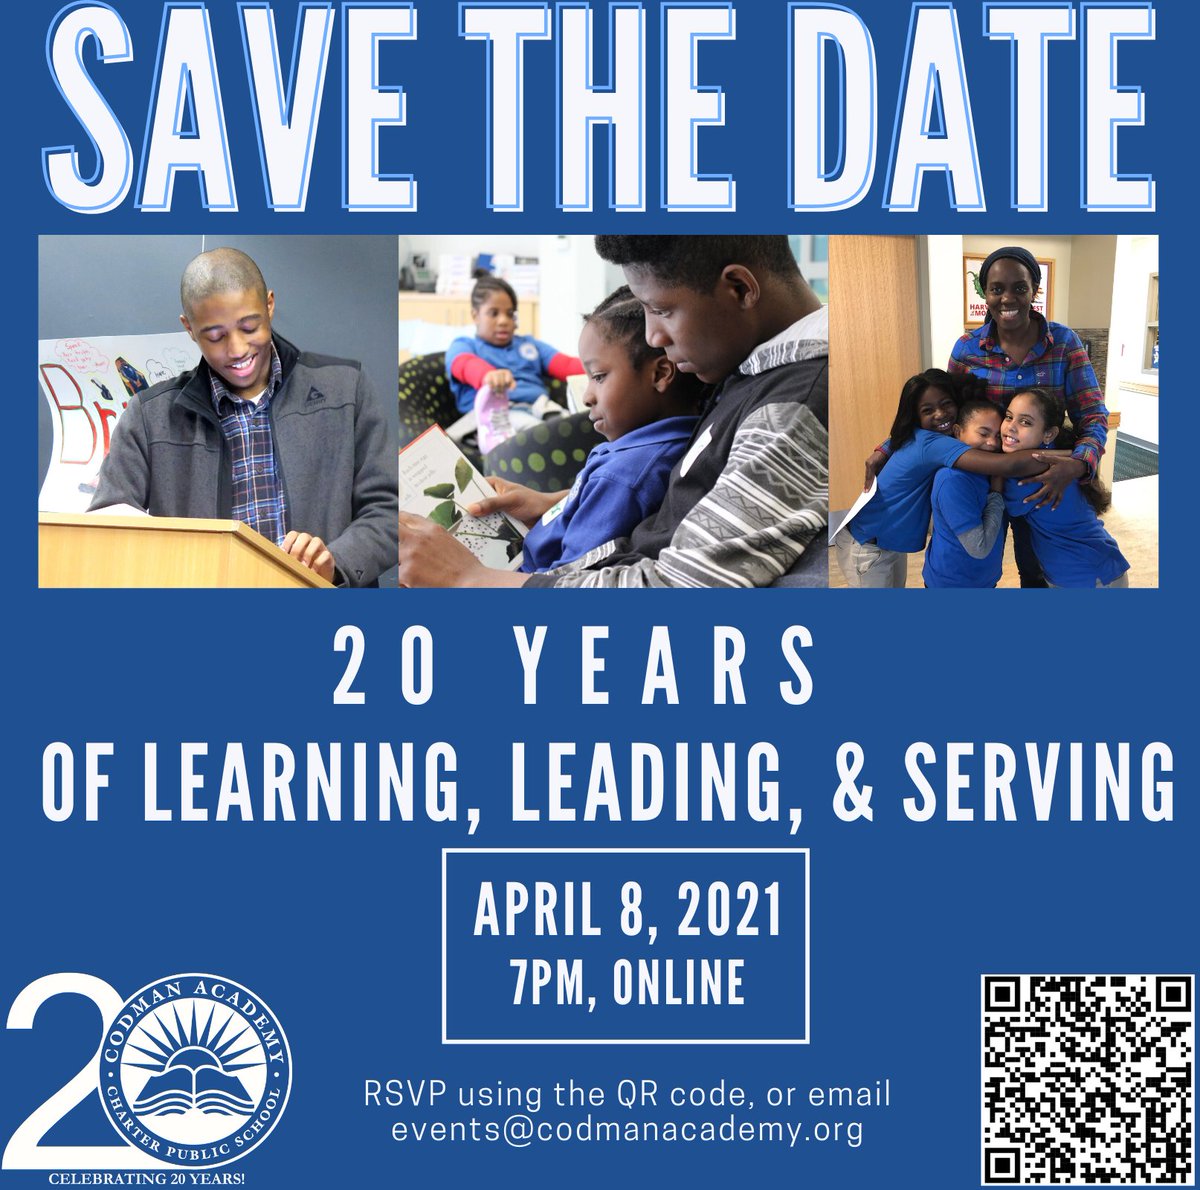 Codman is celebrating '20 Years of Learning, Leading, and Serving!' Join us on Thursday, April 8, 2021 at 7pm. RSVP at the link below to make sure you don't miss an update! tinyurl.com/5wph3c34